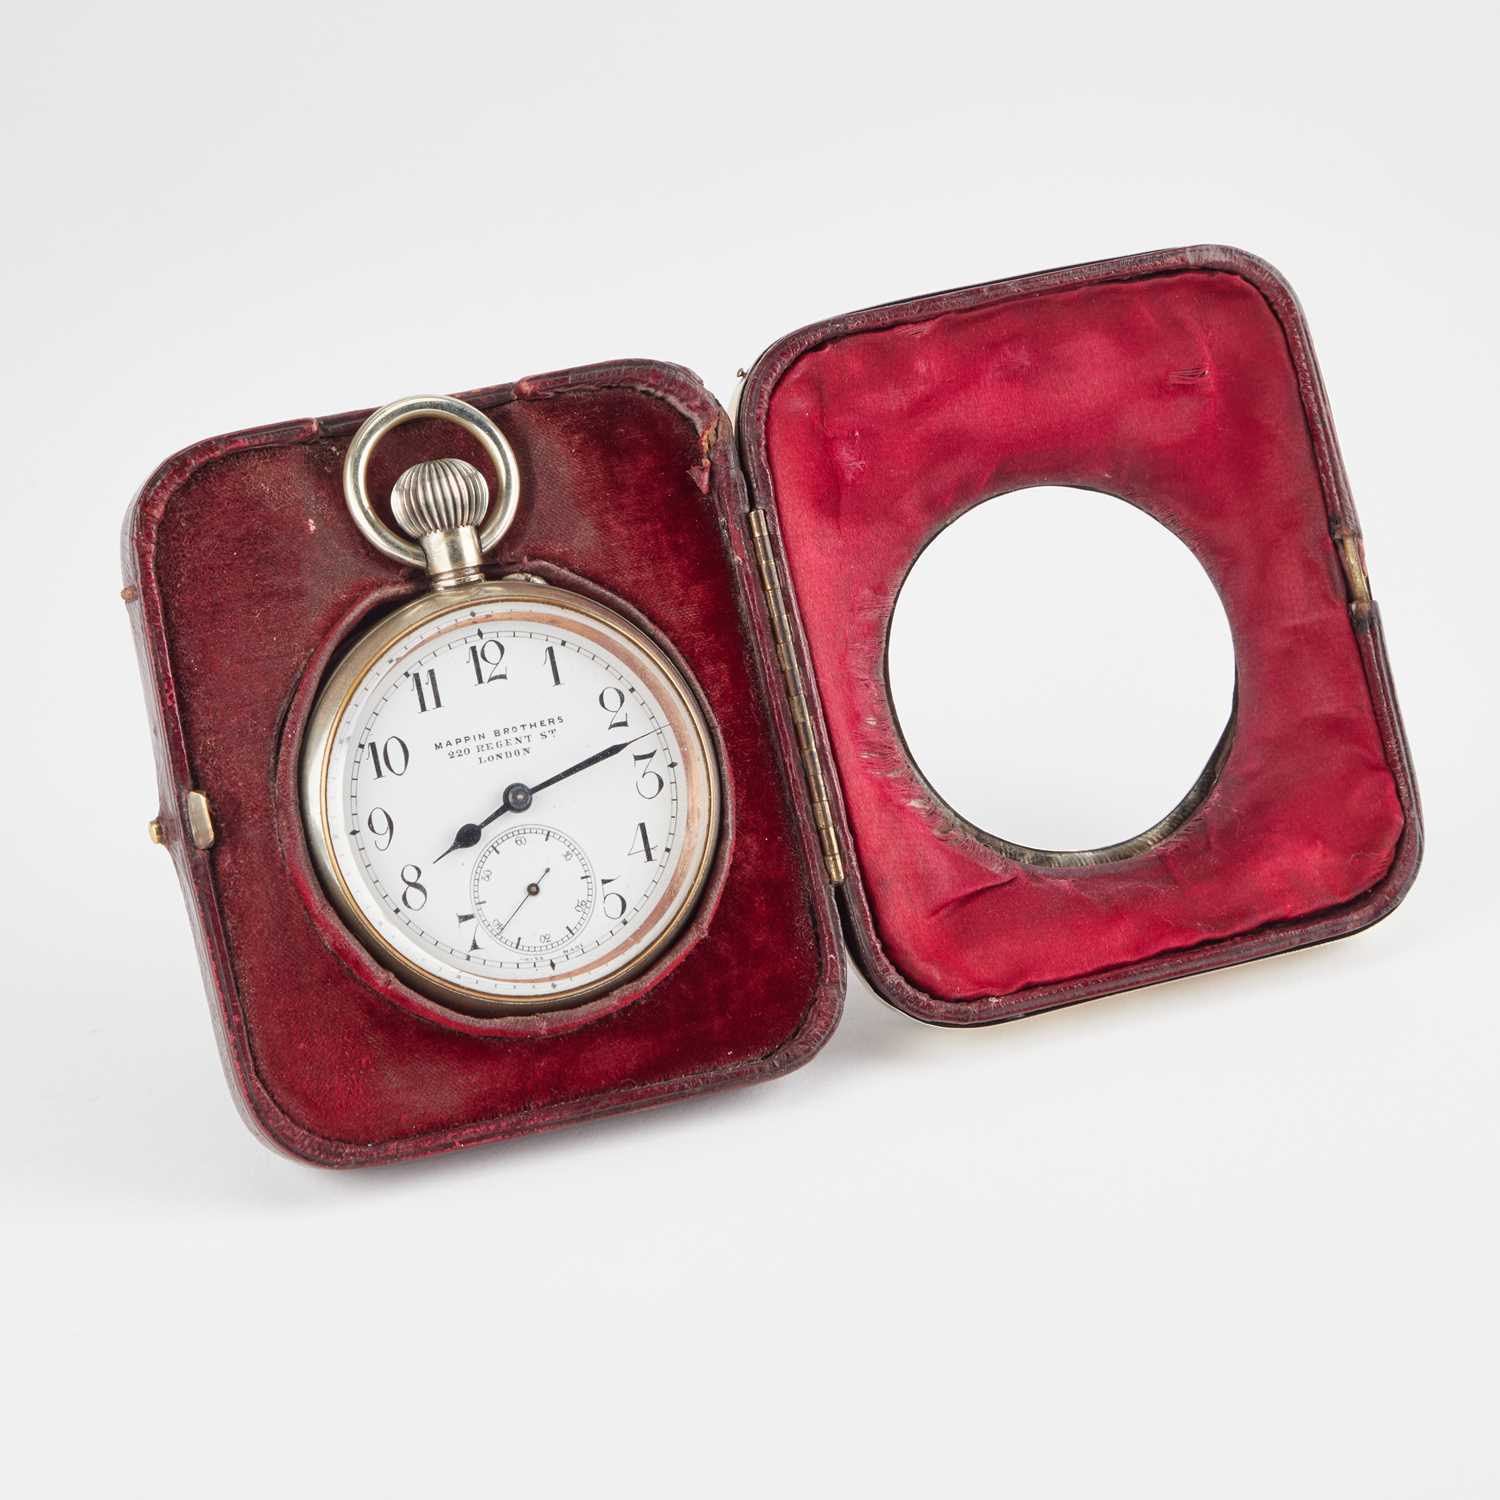 A VICTORIAN SILVER-MOUNTED GOLIATH POCKET WATCH CASE AND A SILVER-PLATED POCKET WATCH - Image 2 of 5